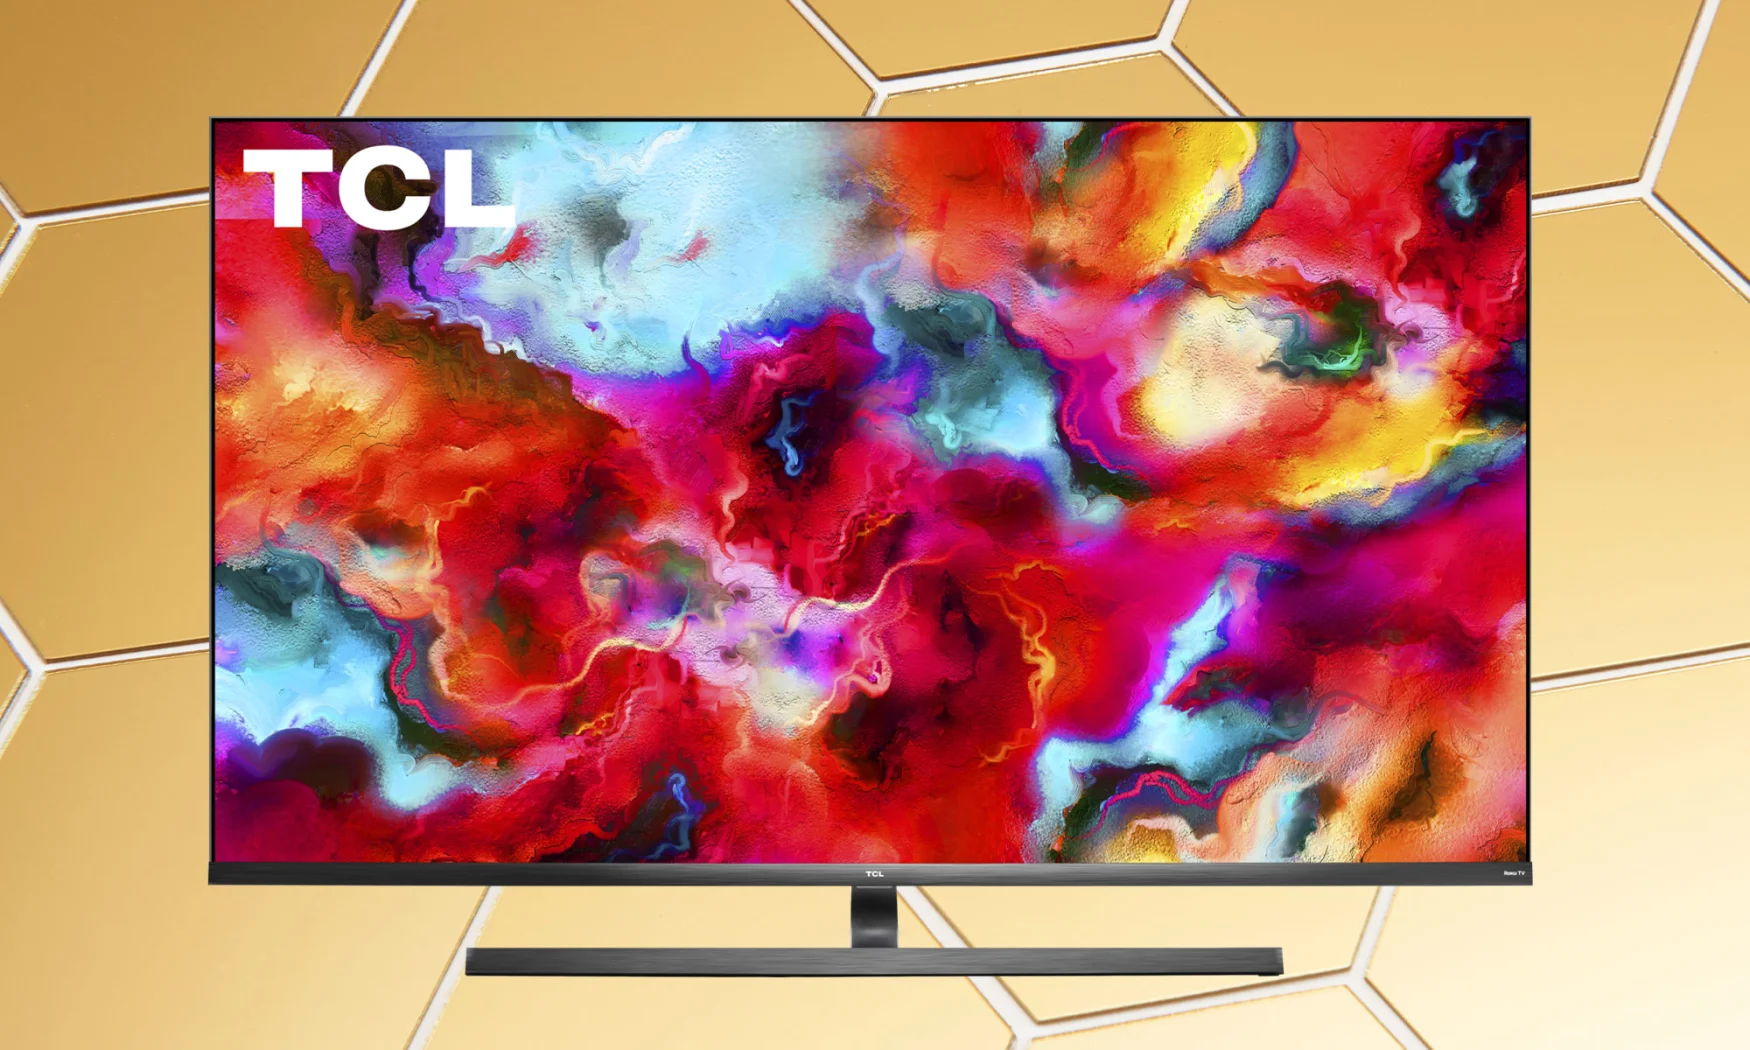 Holiday Gift Guide: TCL 65Q825 TV